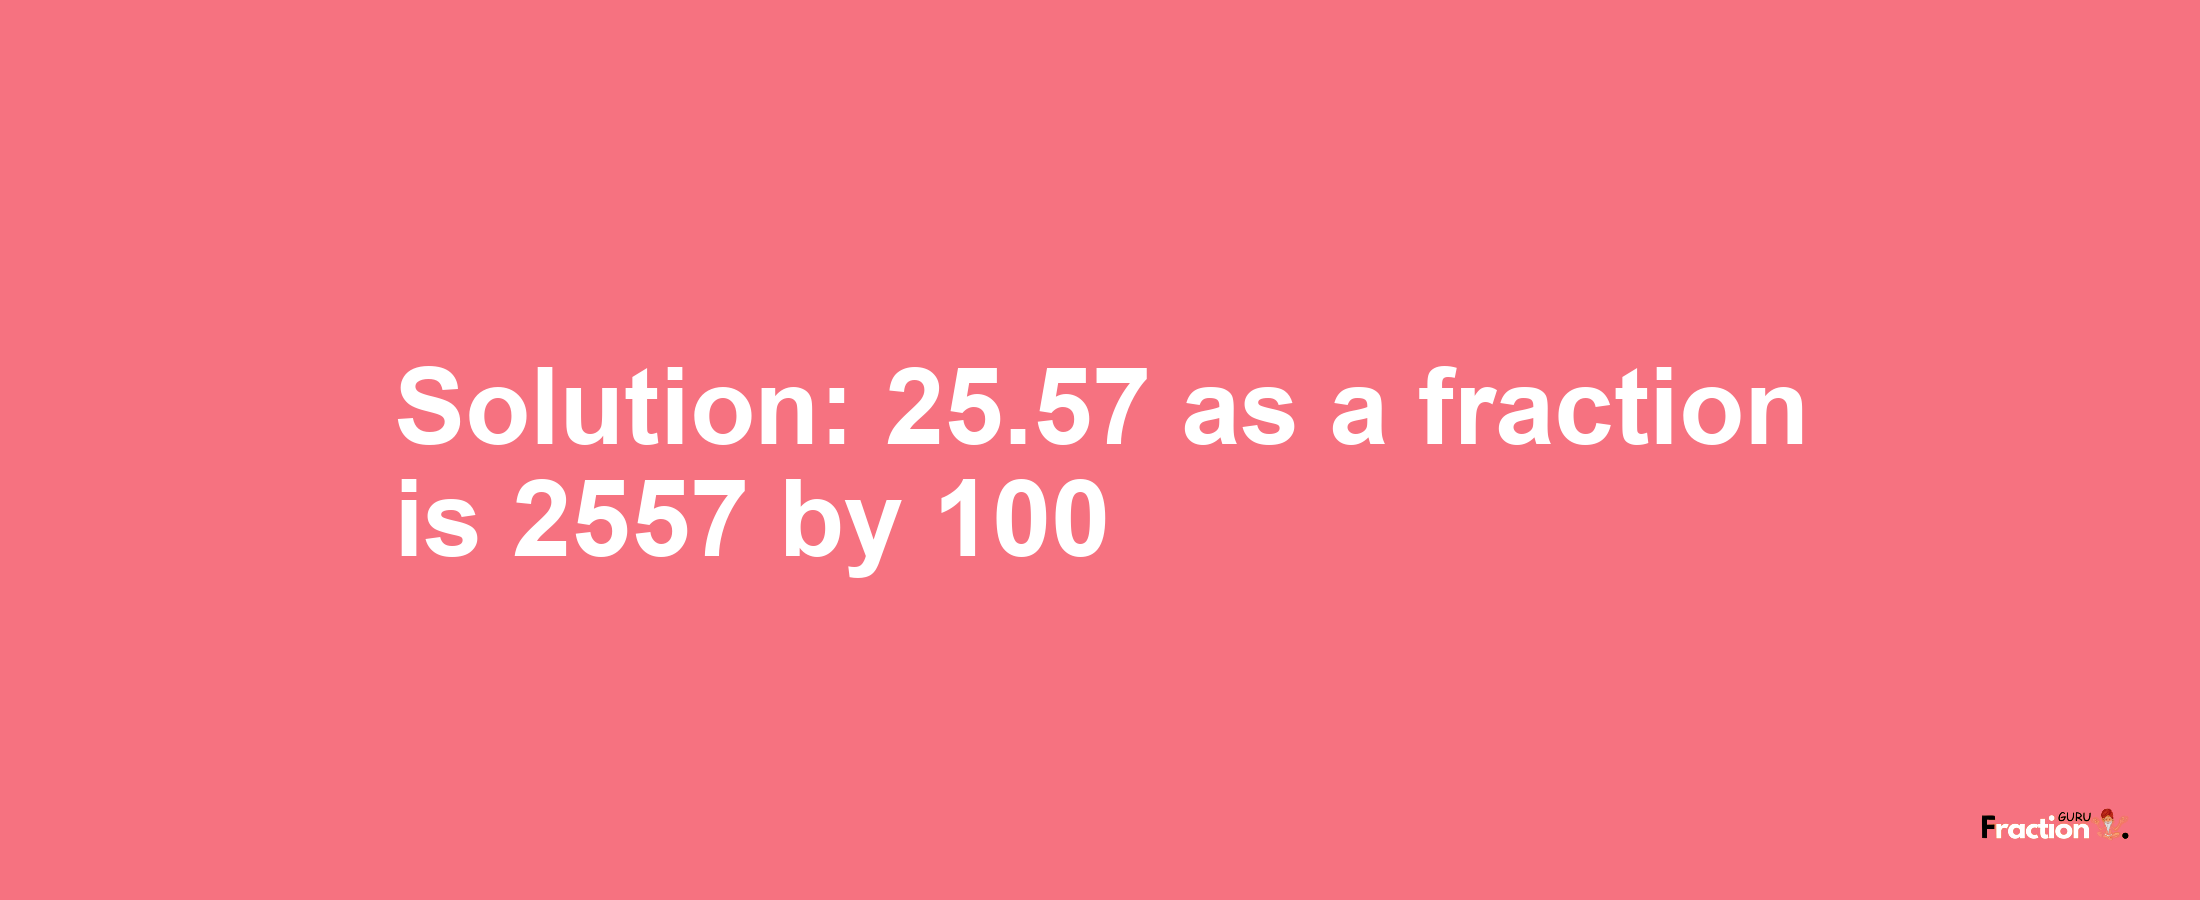 Solution:25.57 as a fraction is 2557/100